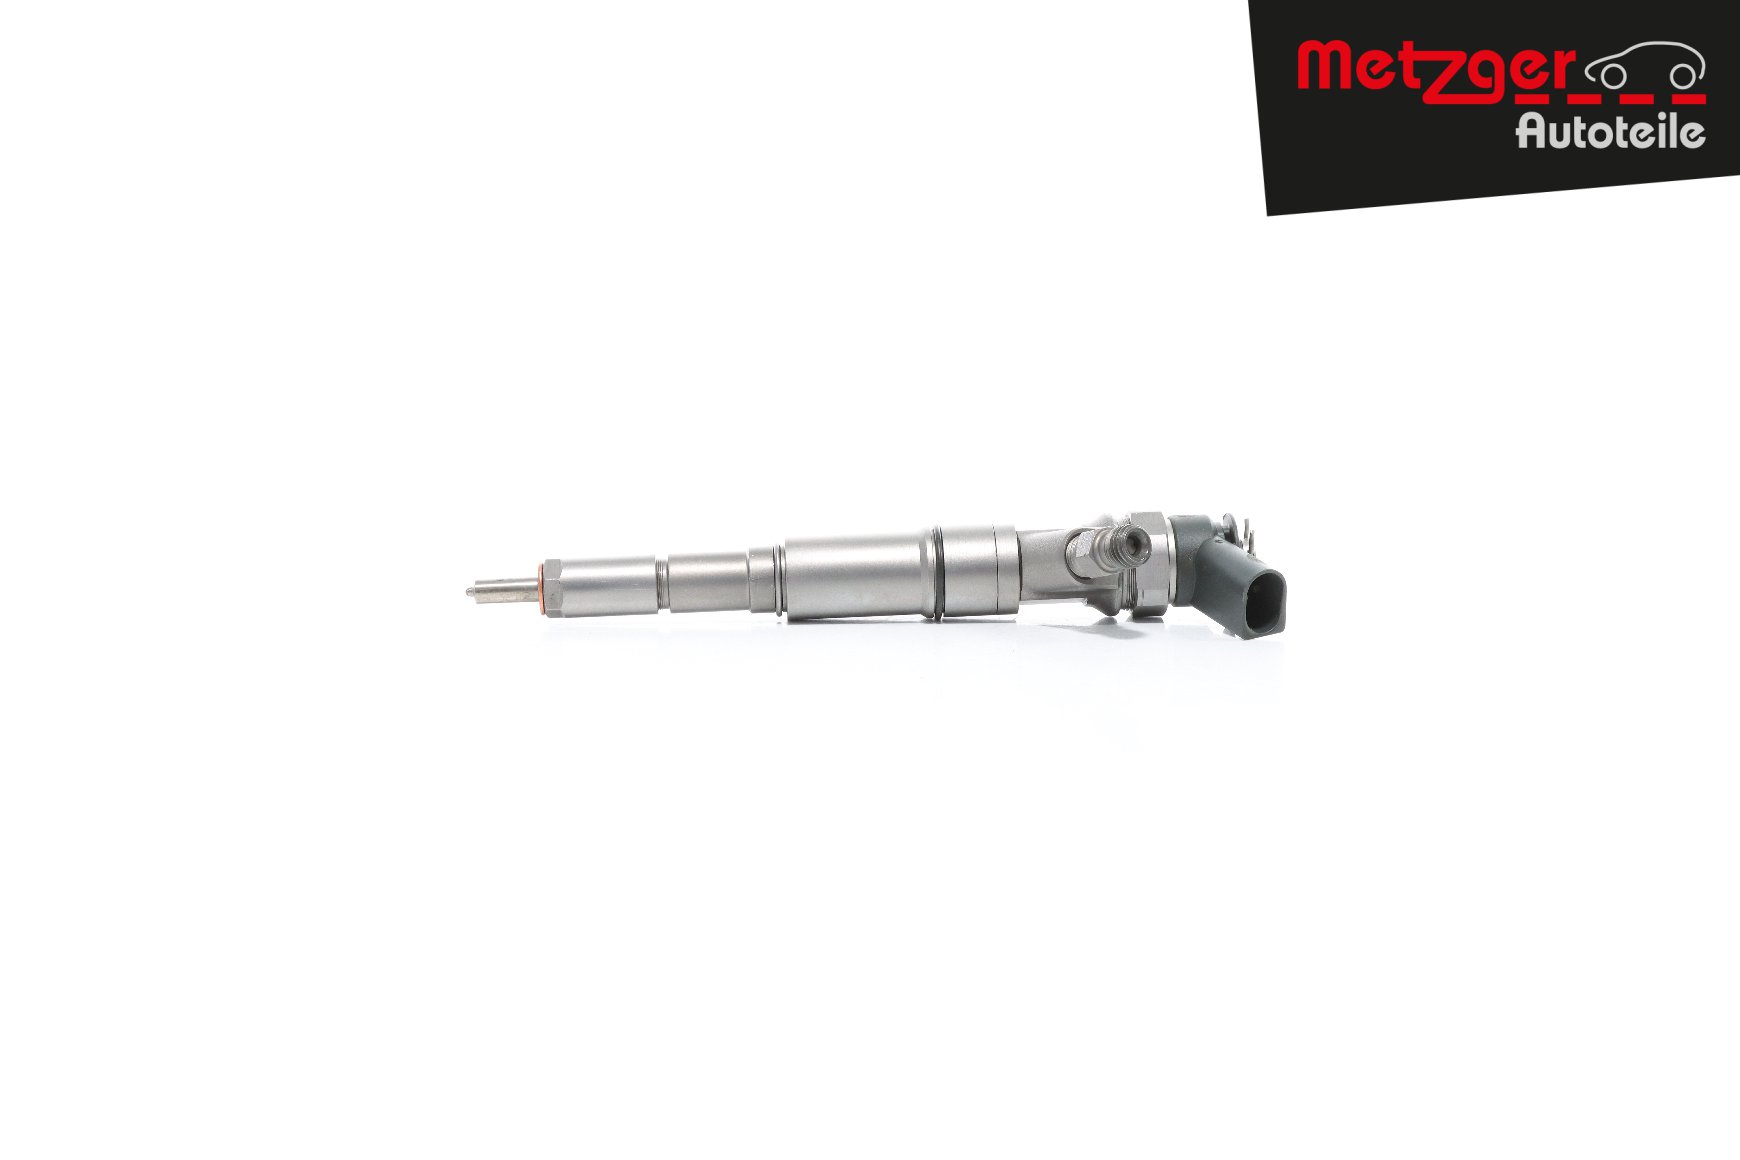 BMW X3 Injector Nozzle METZGER 0870061 cheap